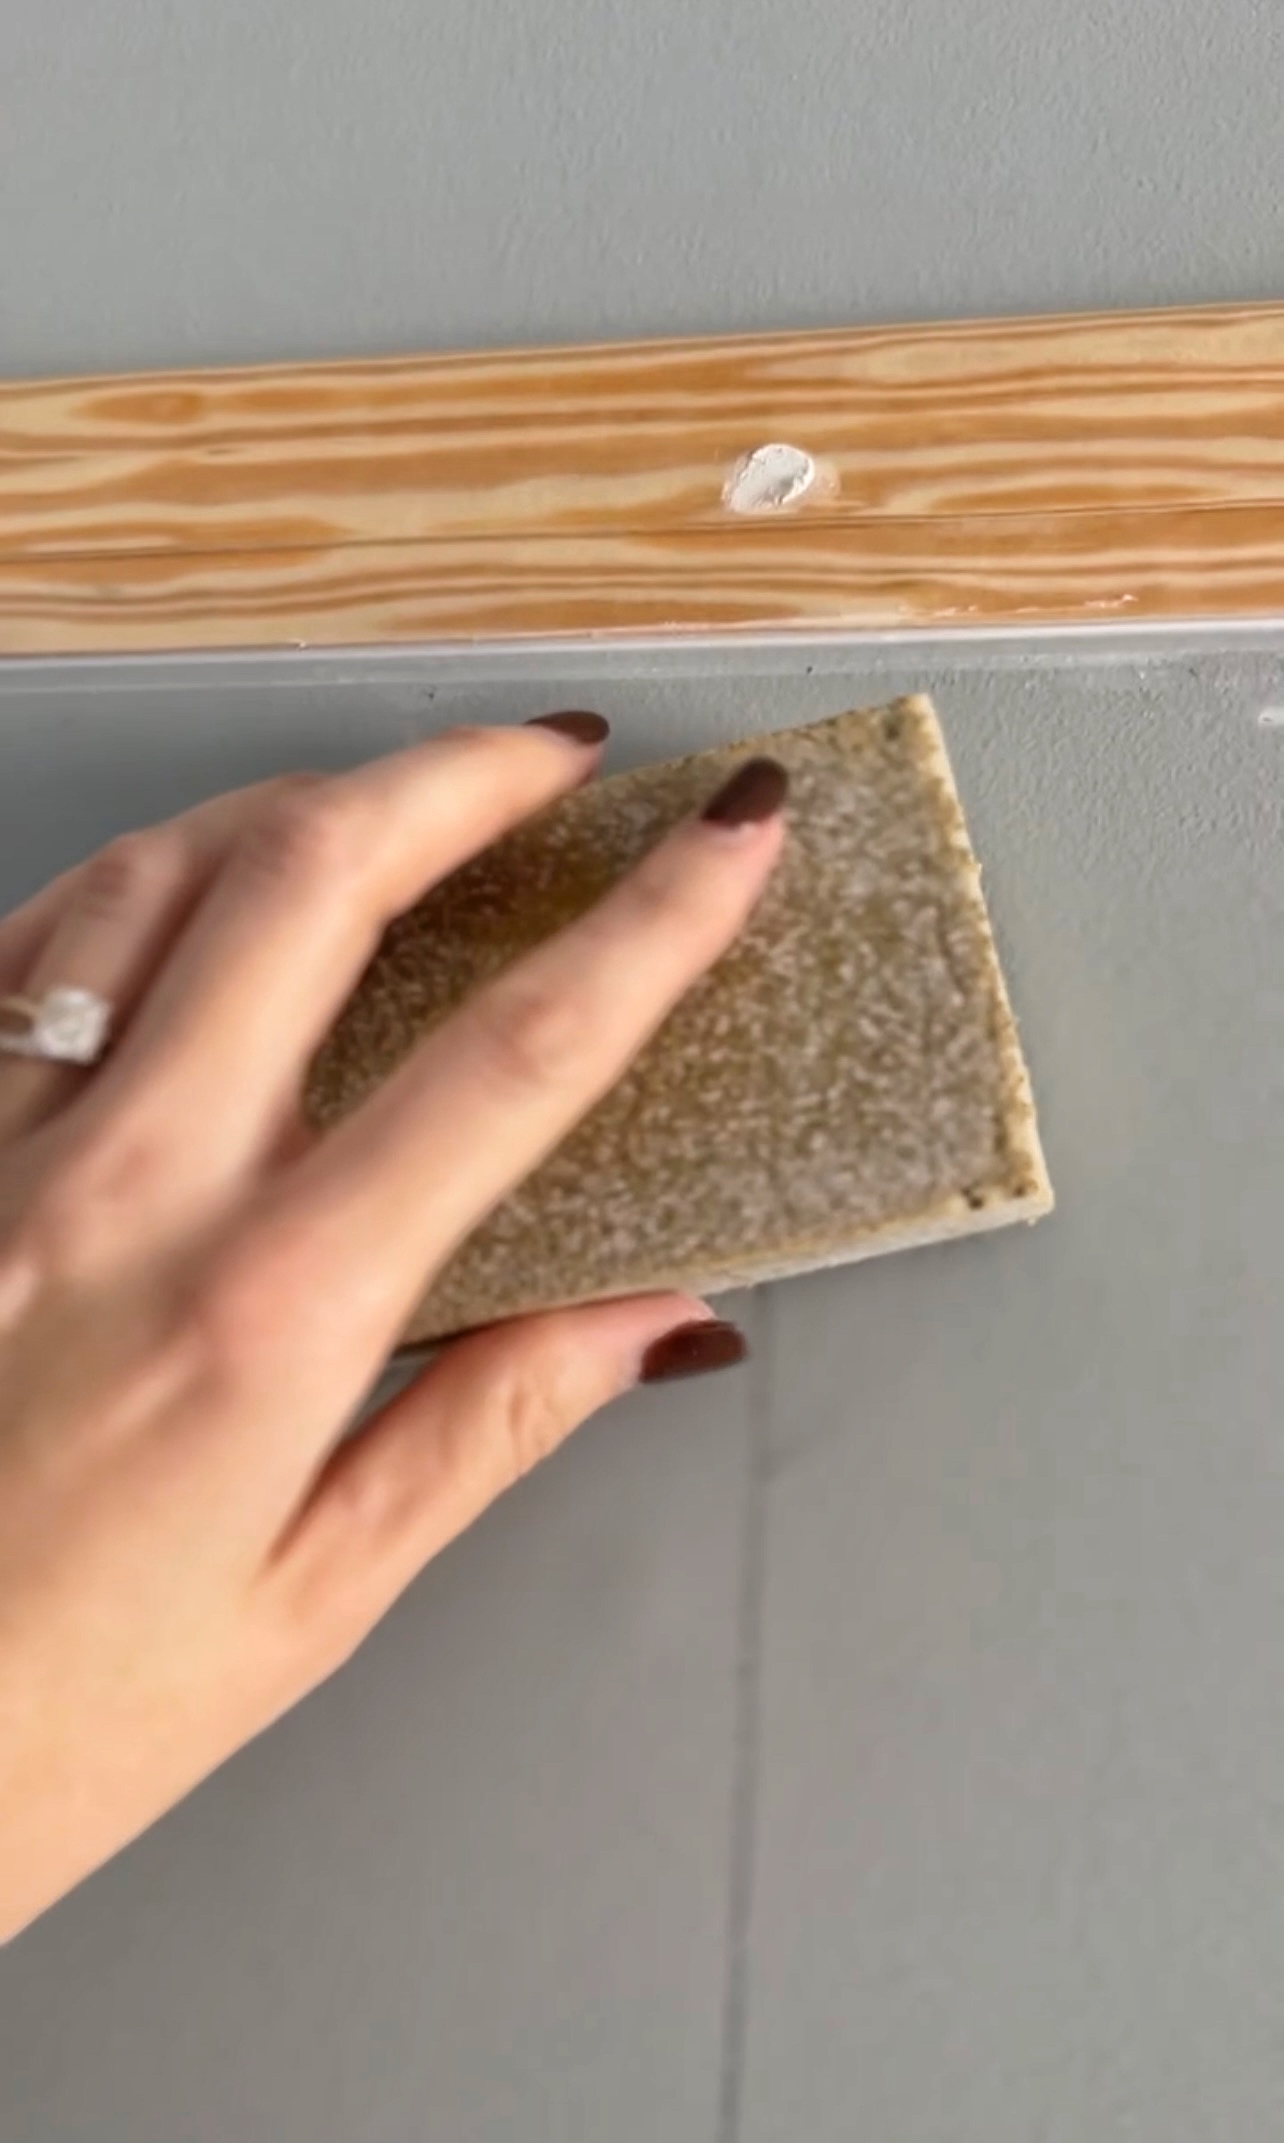 Using a sanding sponge to sand down spackle on picture moulding